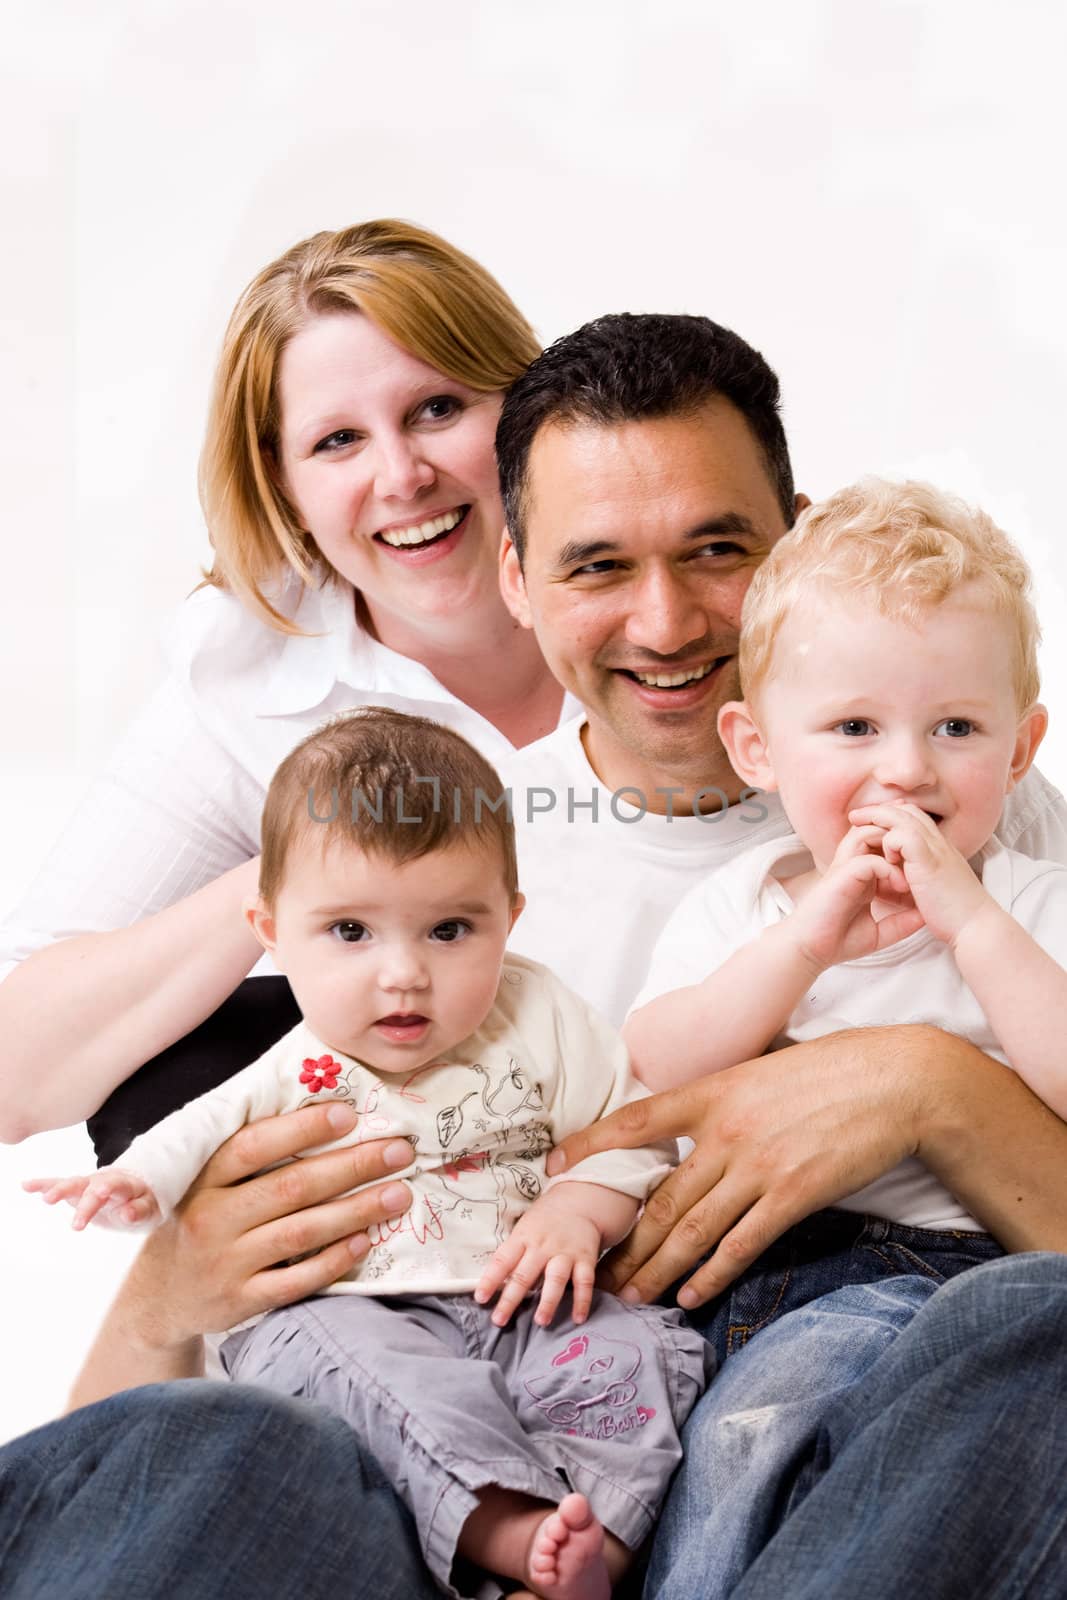 Cute brother and sister from different races having fun with daddy and mom